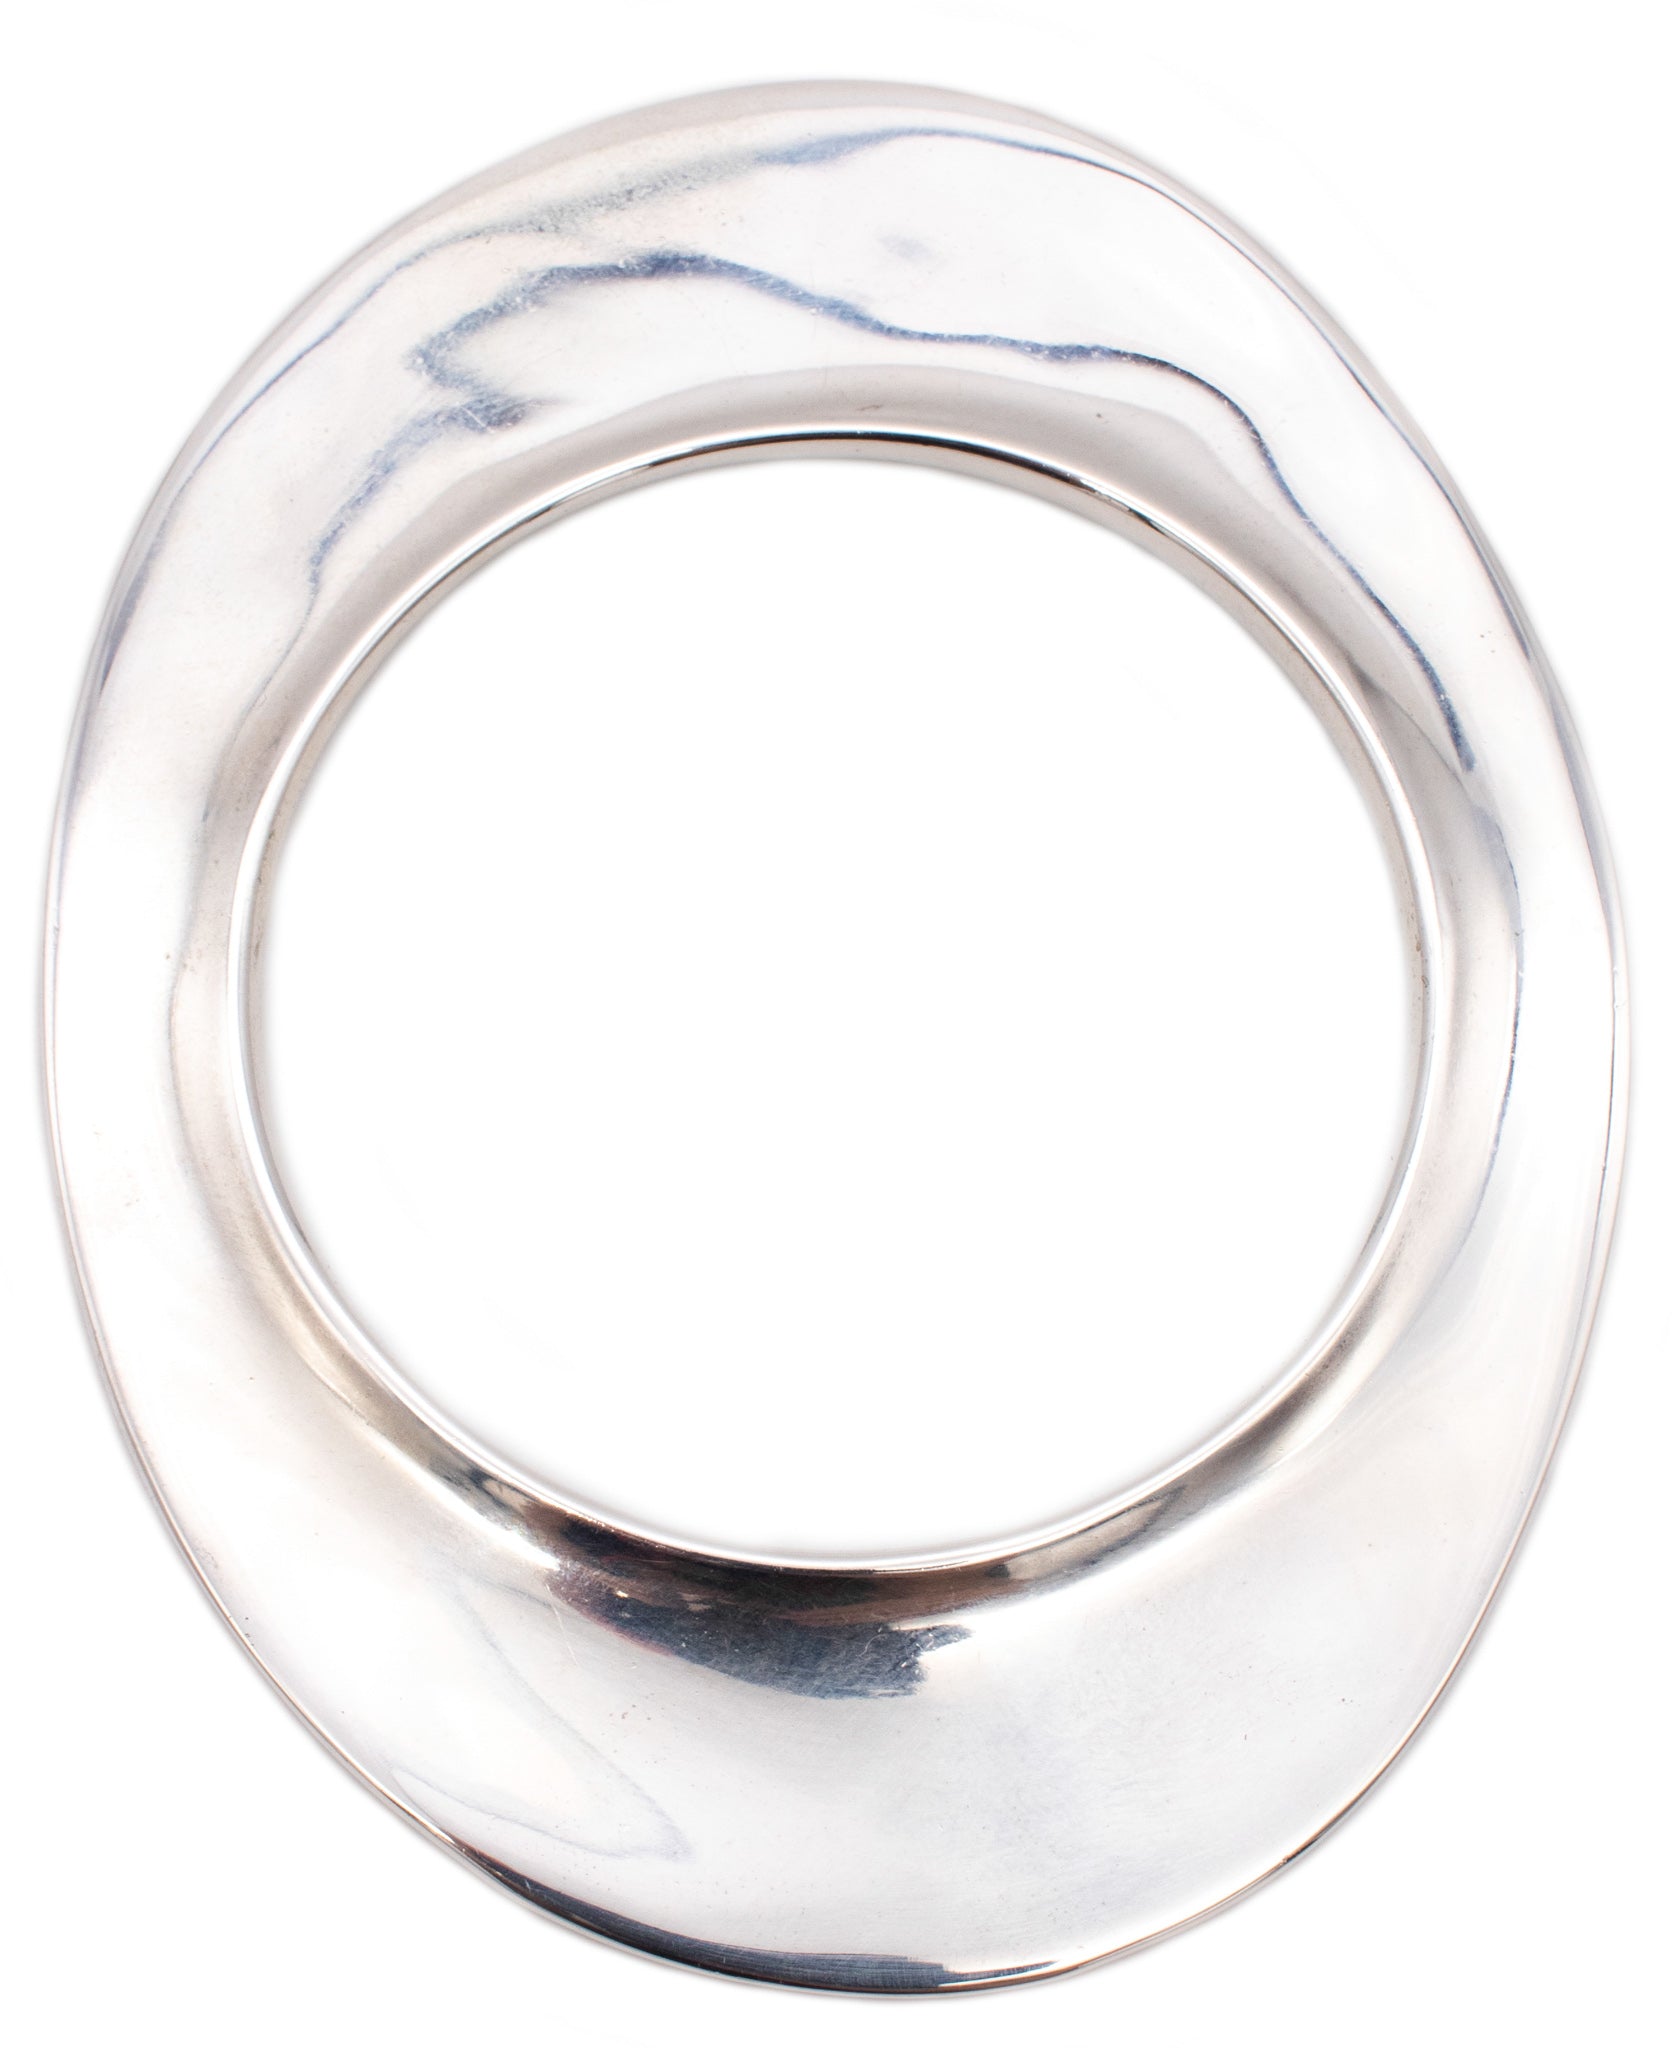 TIFFANY & CO. 1982 BY ELSA PERETTI, FLYING SAUCER OVAL BRACELET-PENDANT IN STERLING SILVER.